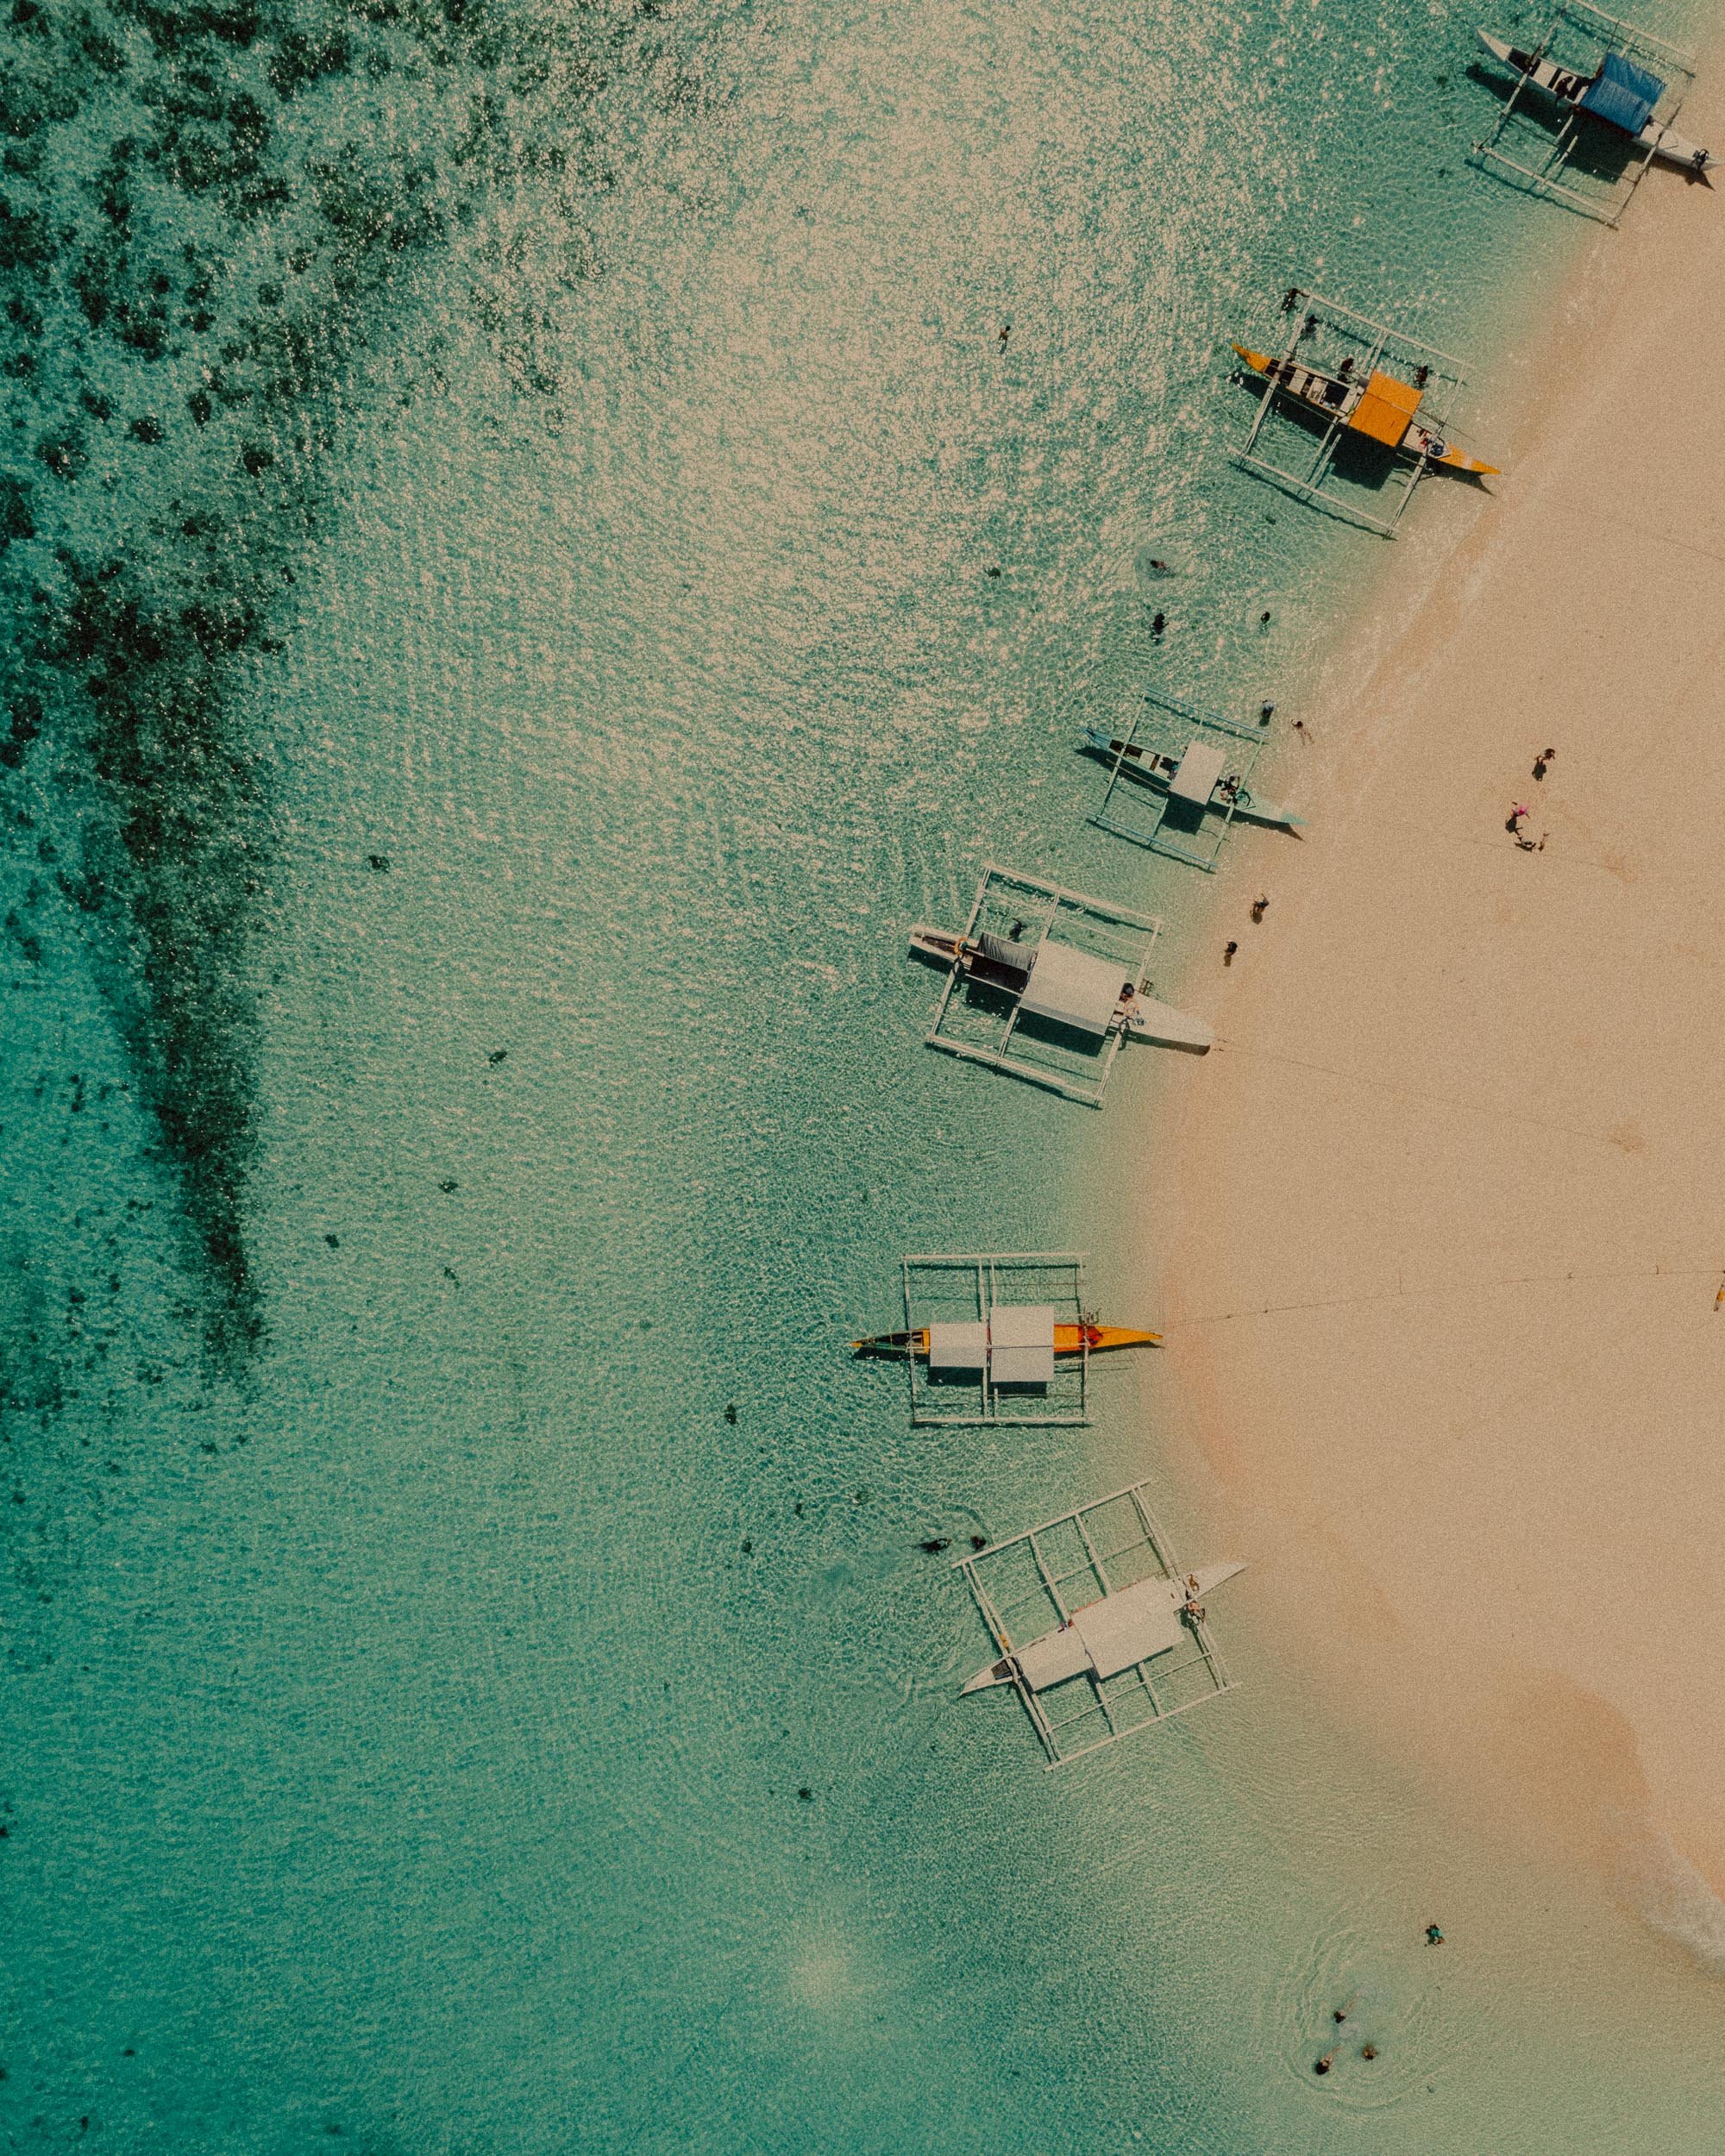 8-Siargao Drone Photography-A bird's-eye view aerial photo of Naked Island, Siargao, Philippines, Southeast Asia, April 2022, Mavic 2 Pro, Hasselblad L1D-20c.jpg